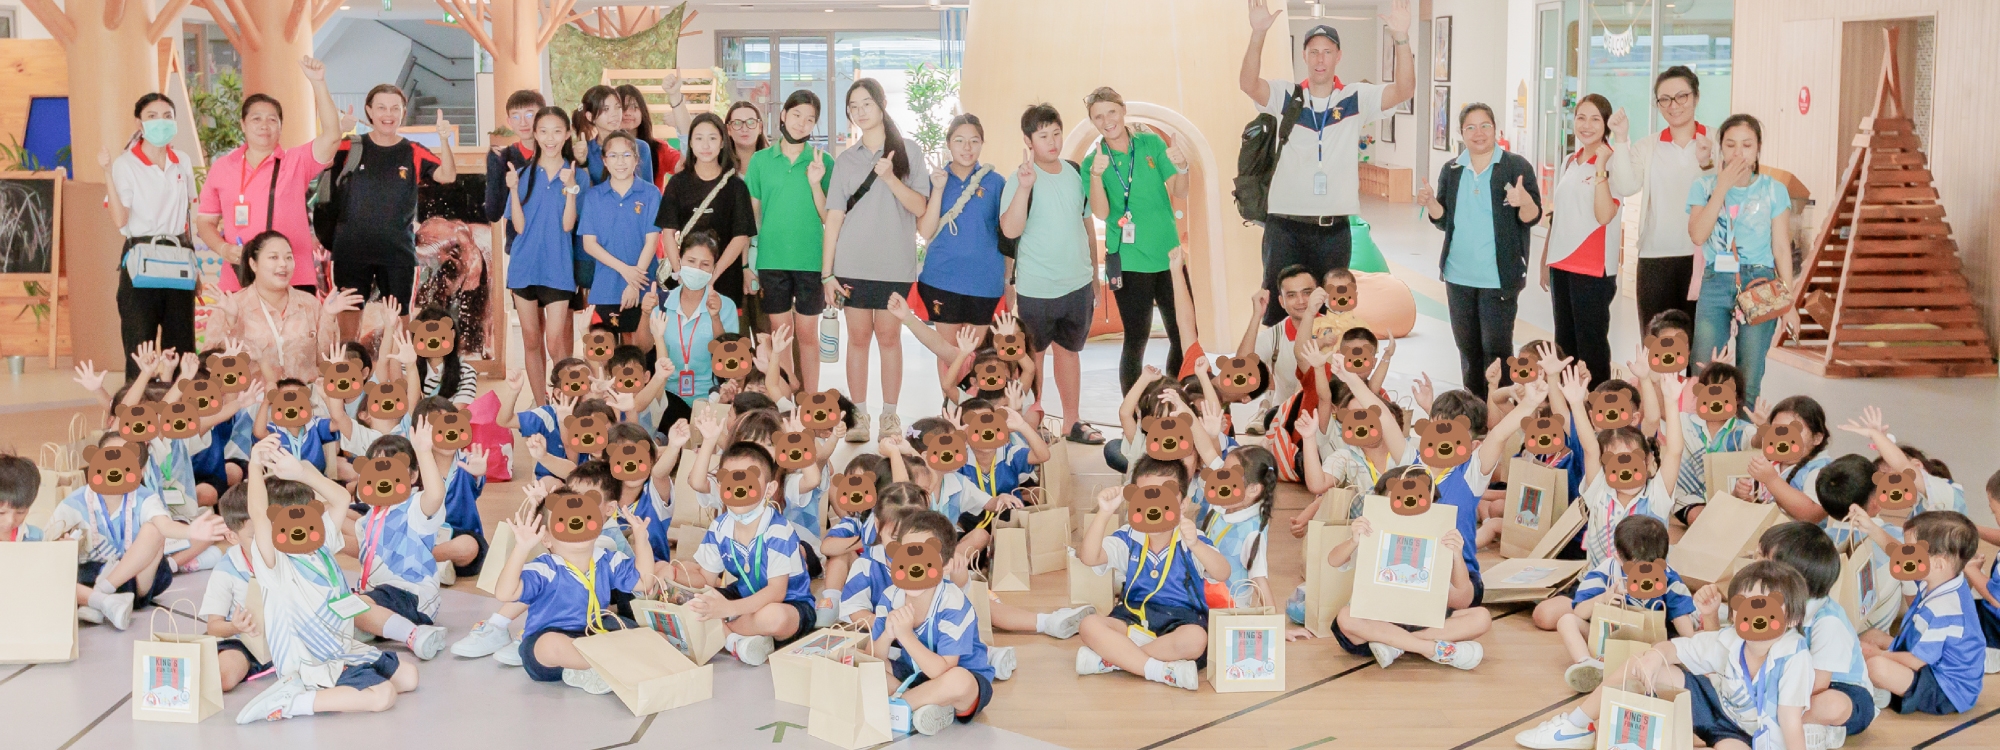 Operation Give Back X The Good Shepherd: Another Fun Day at King's Bangkok